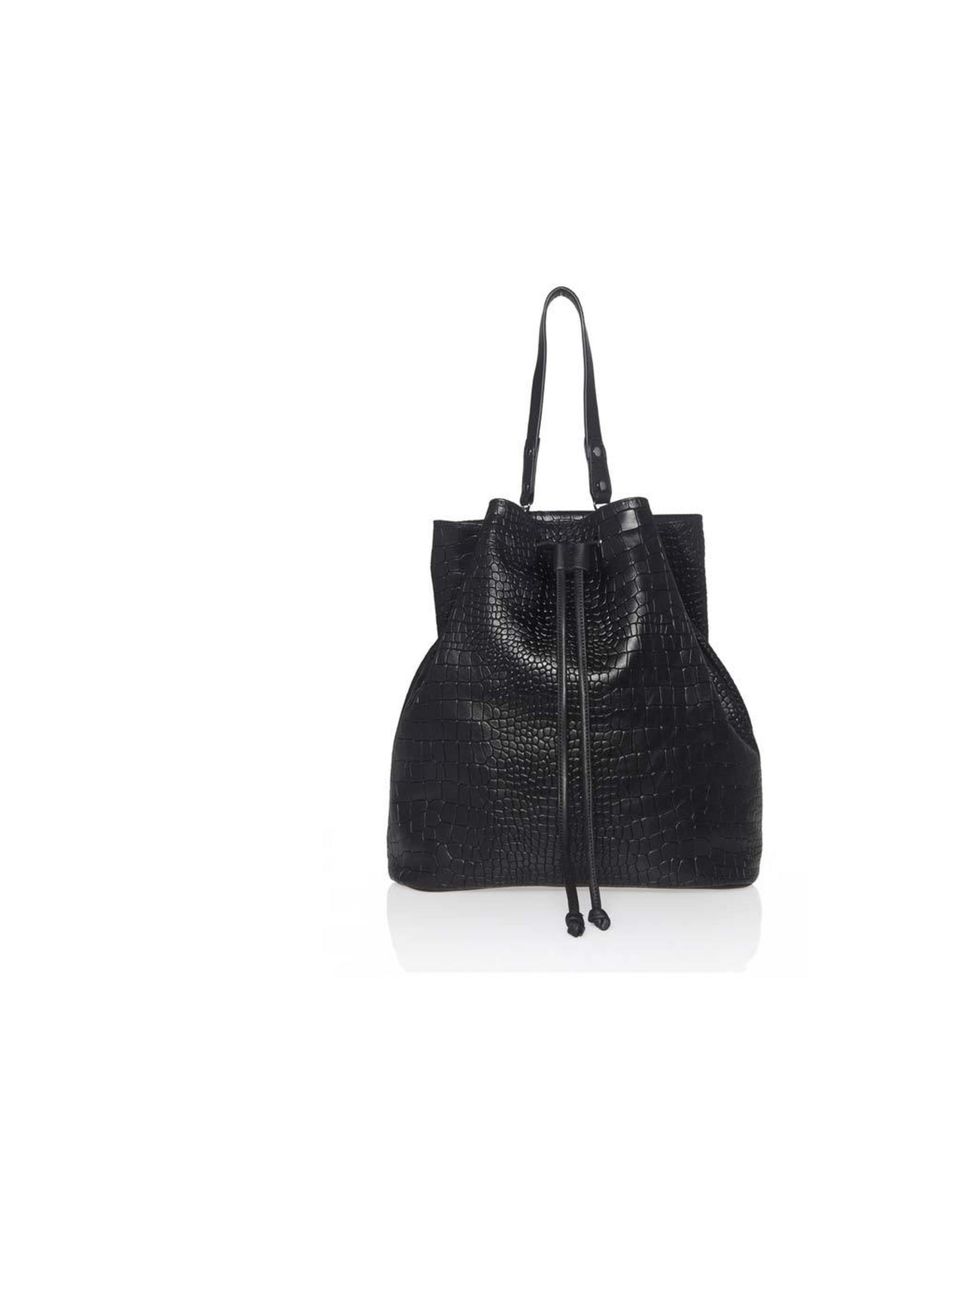 <p>Embossed leather makes for a souped-up version of the grunge bag of choice, the rucksack. The drawstring close and informal slouchy design keep this low-key... <a href="http://www.kurtgeiger.com/bags/dash-rucksack-black-leather-kurt-geiger-london-acces